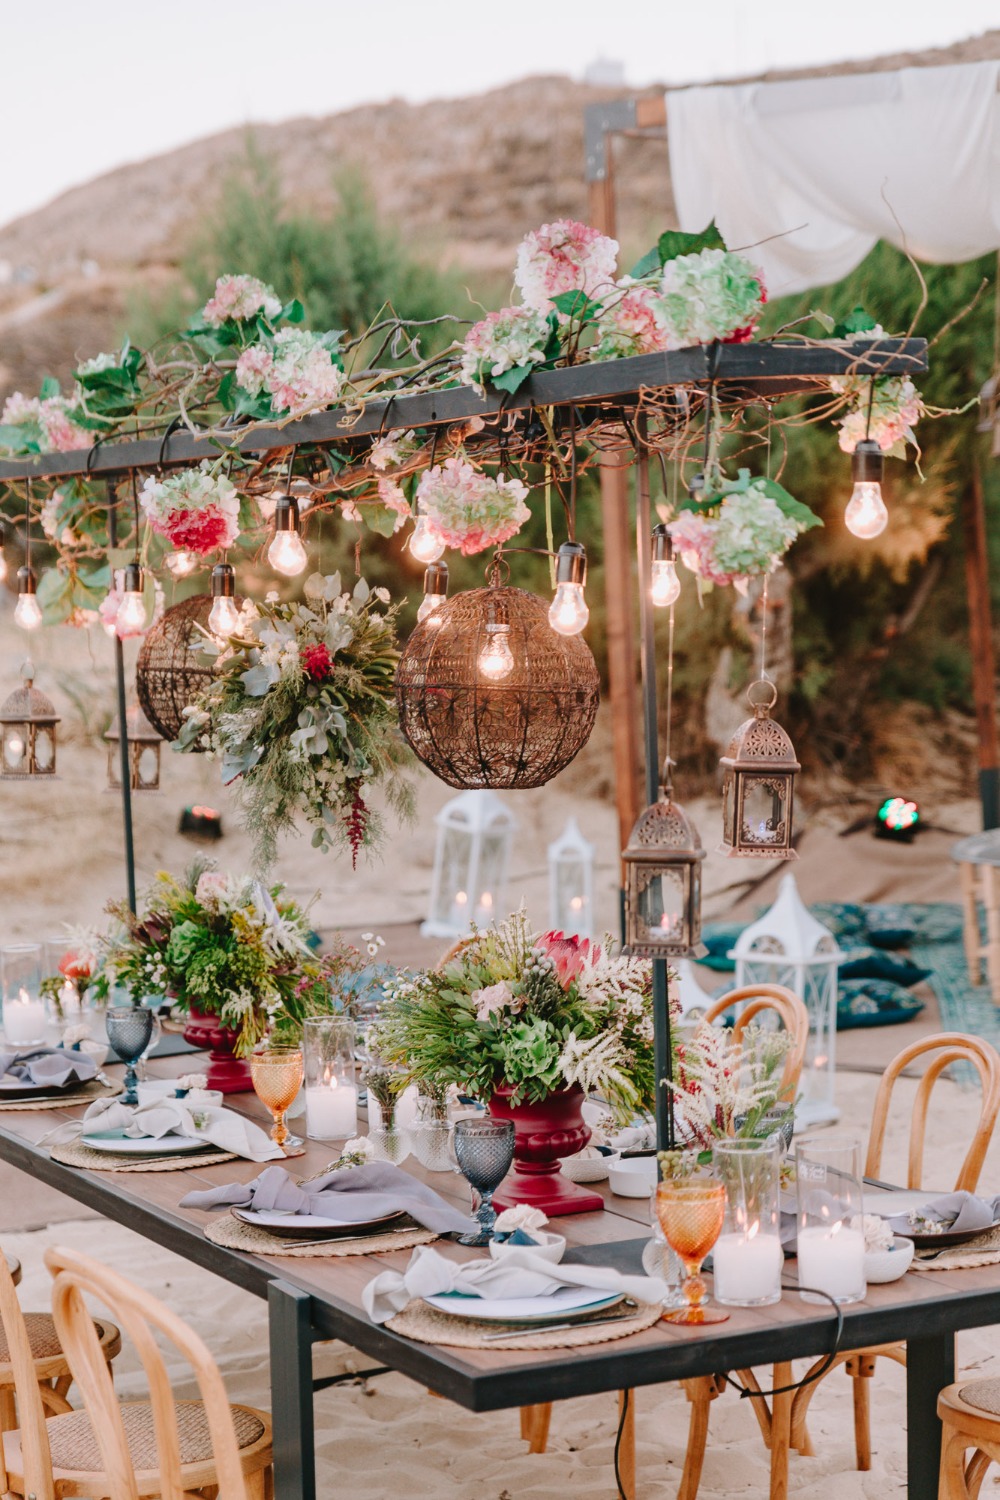 Wedding table decor idea with hanging lights